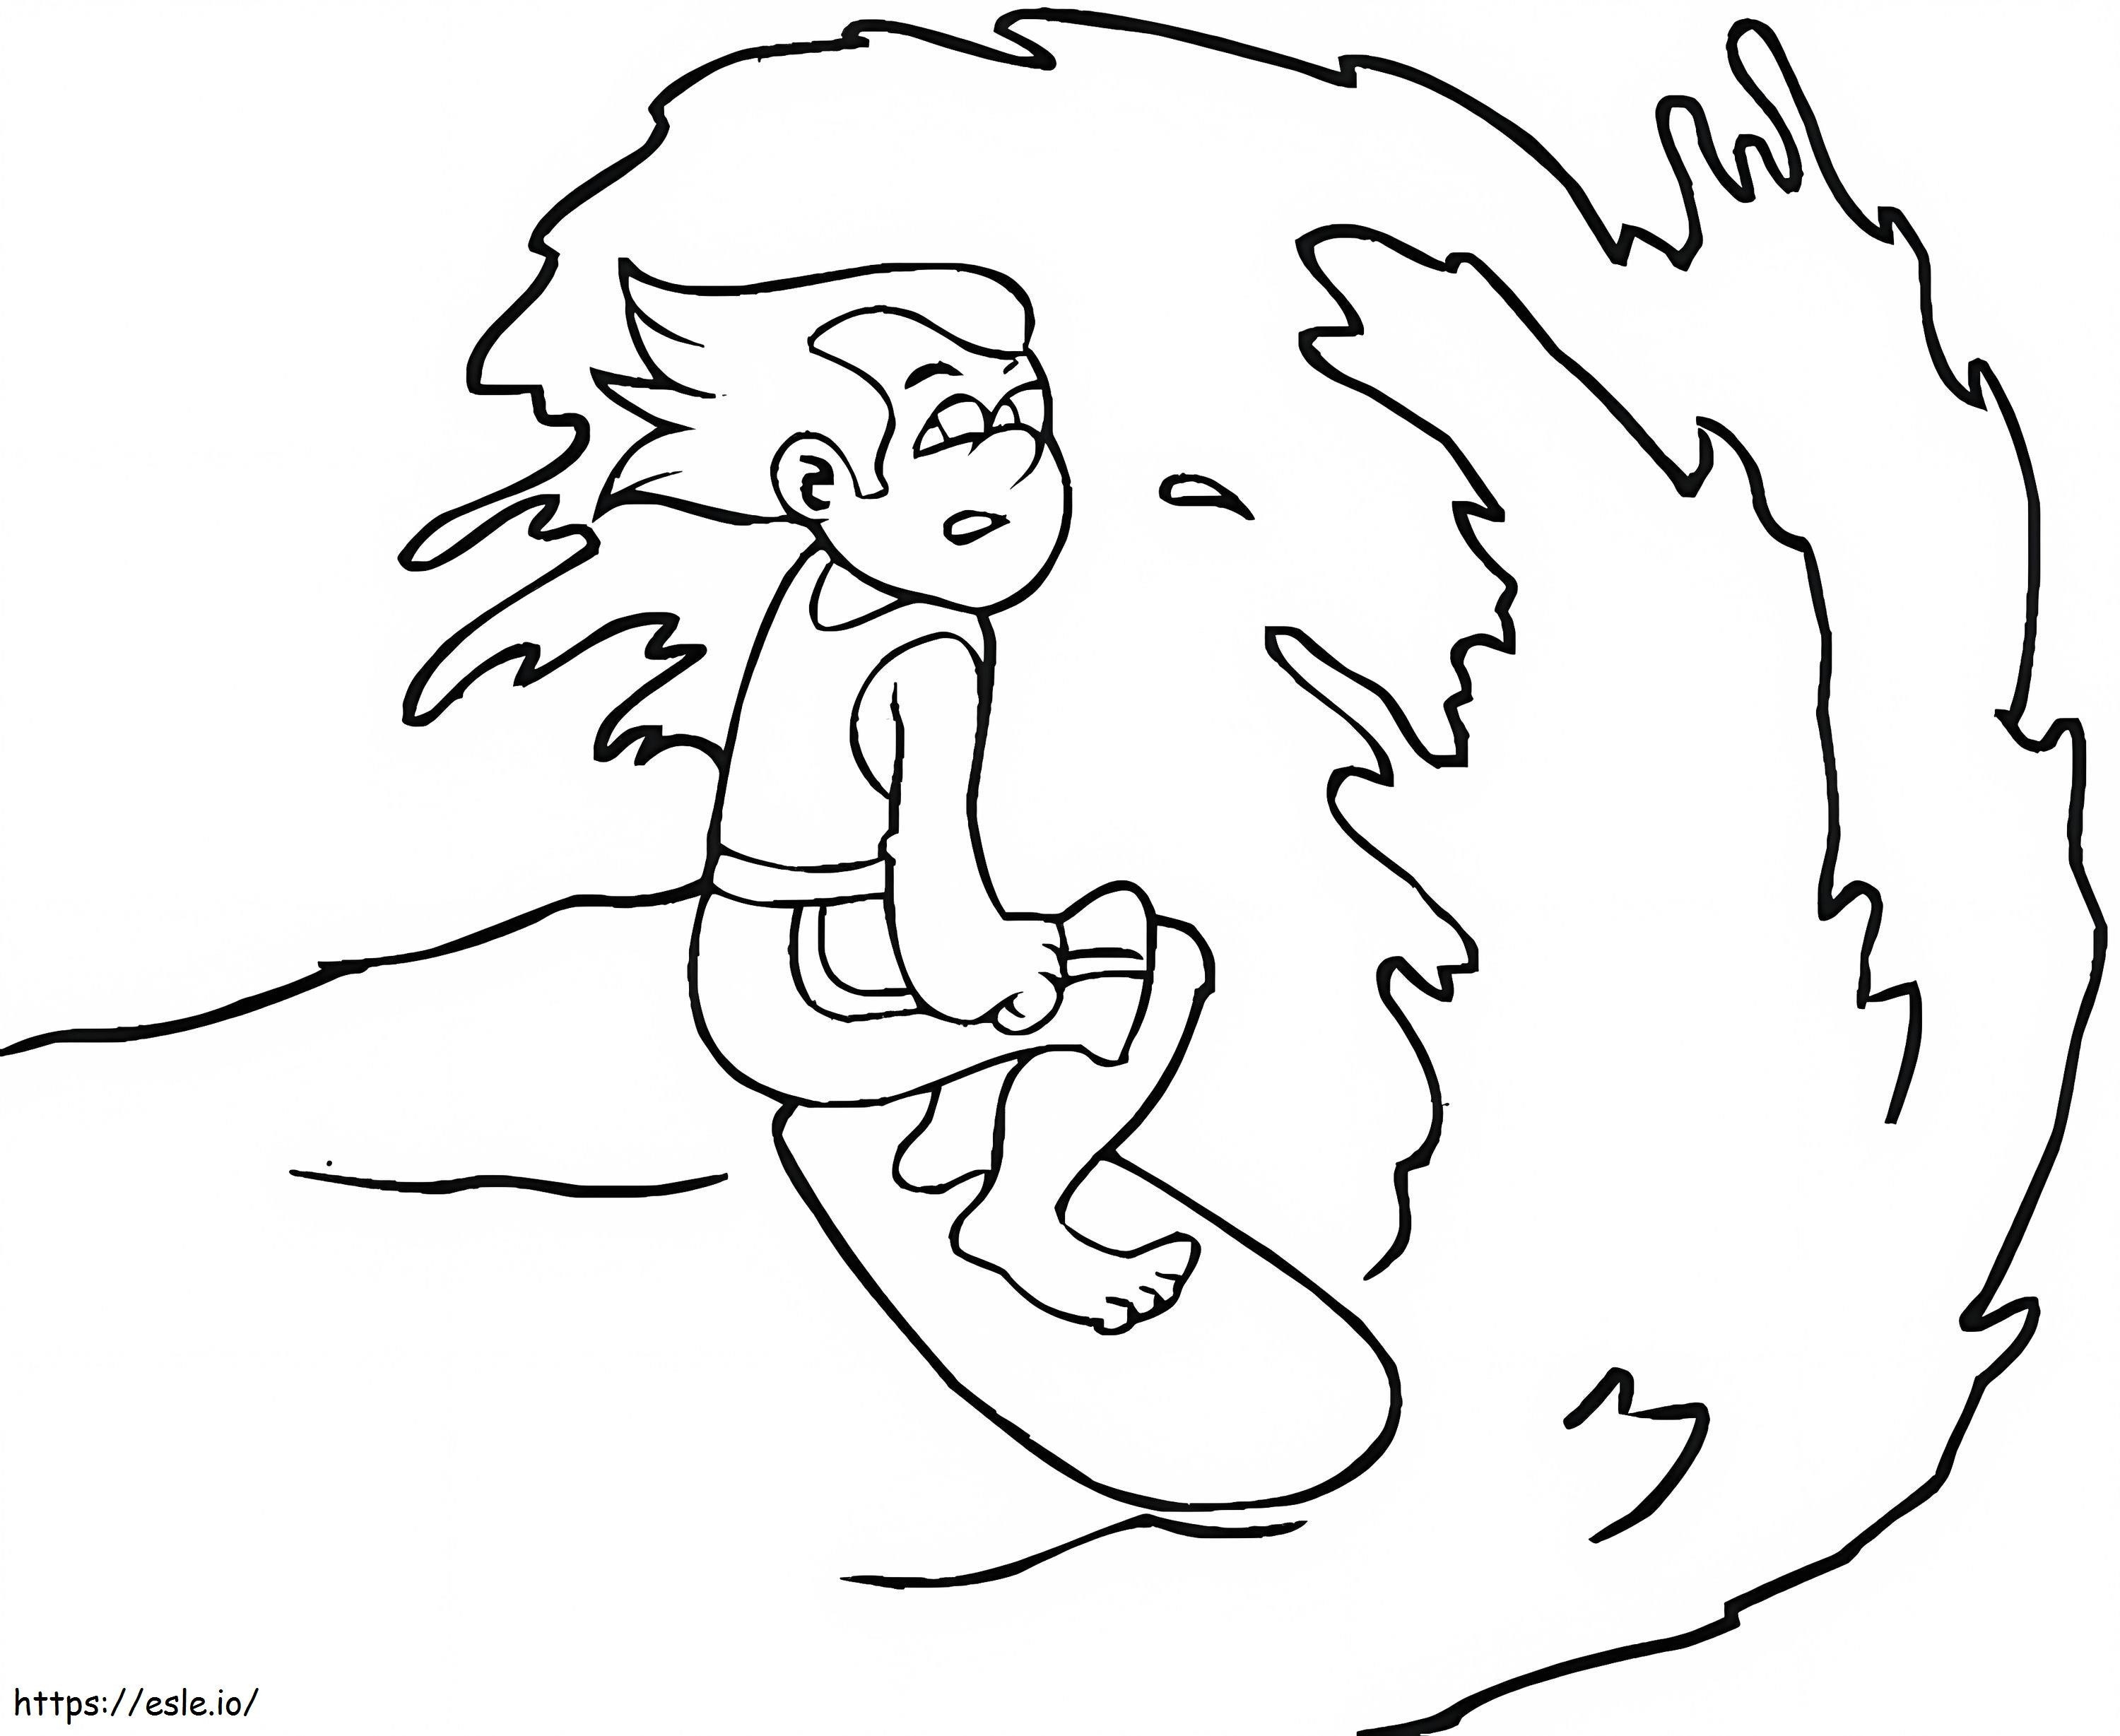 Cool Guy Surfing coloring page